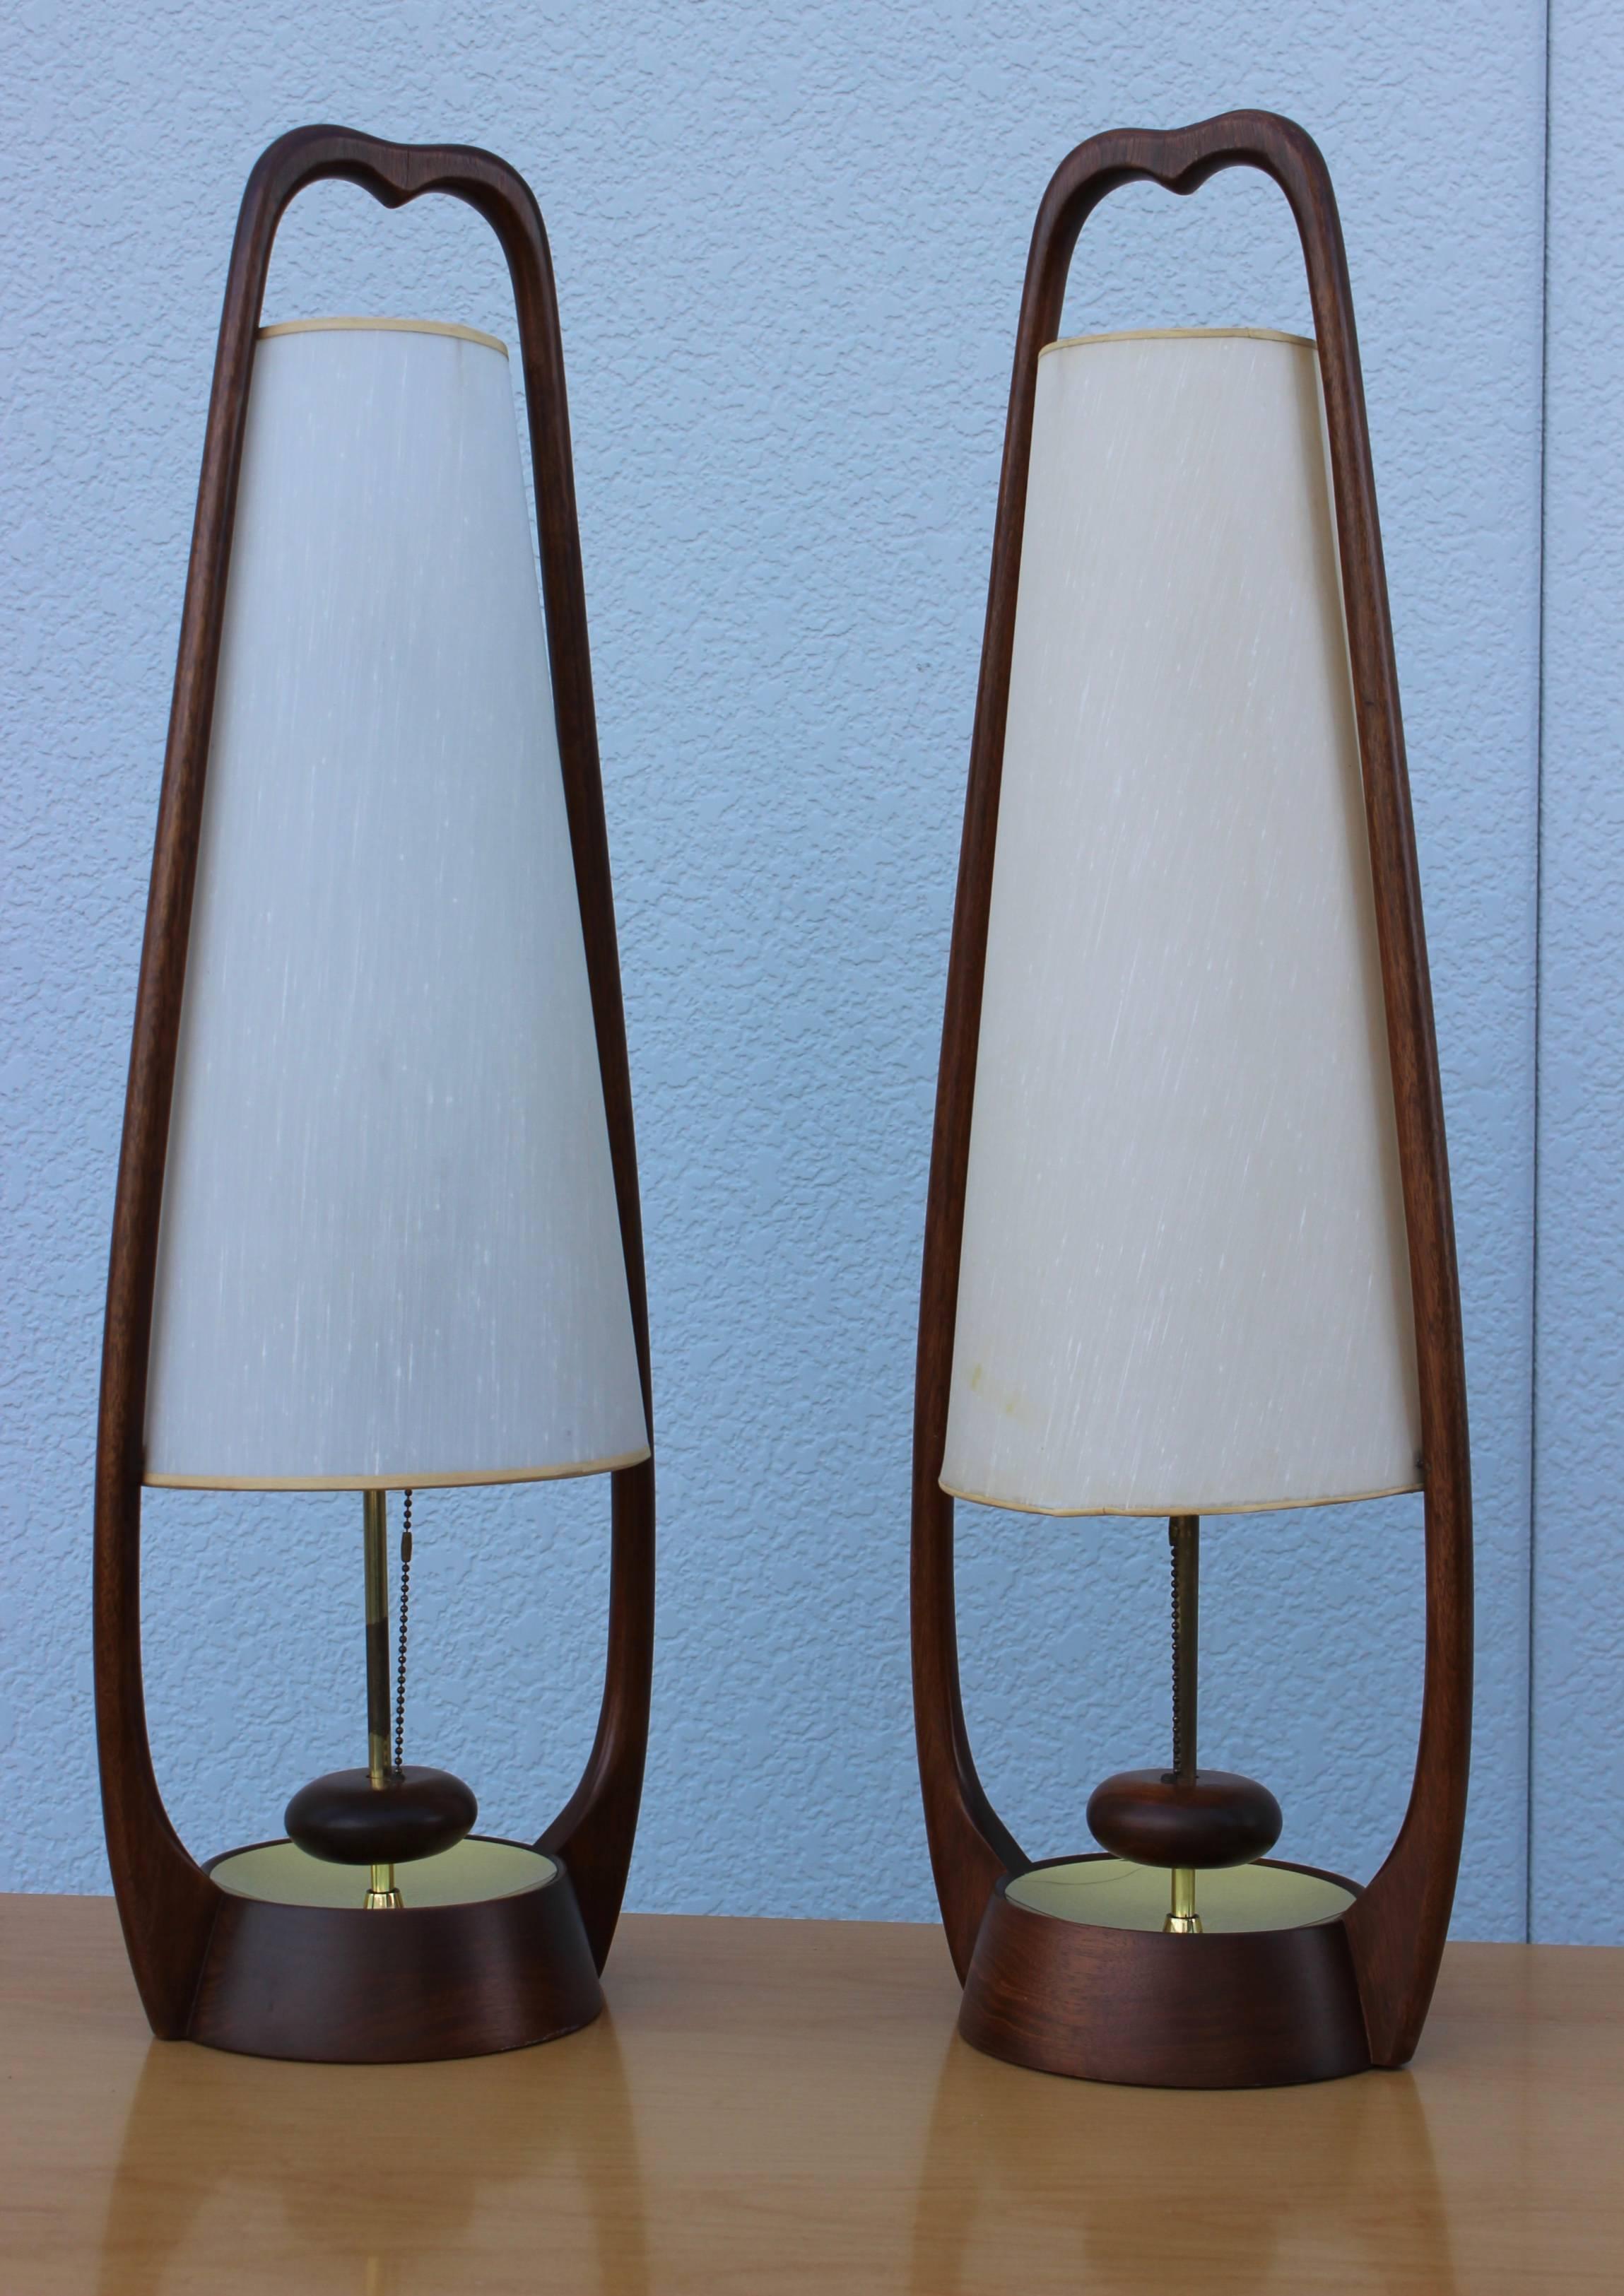 1960s modern walnut and brass table lamps with original fiberglass shades by Modeline.